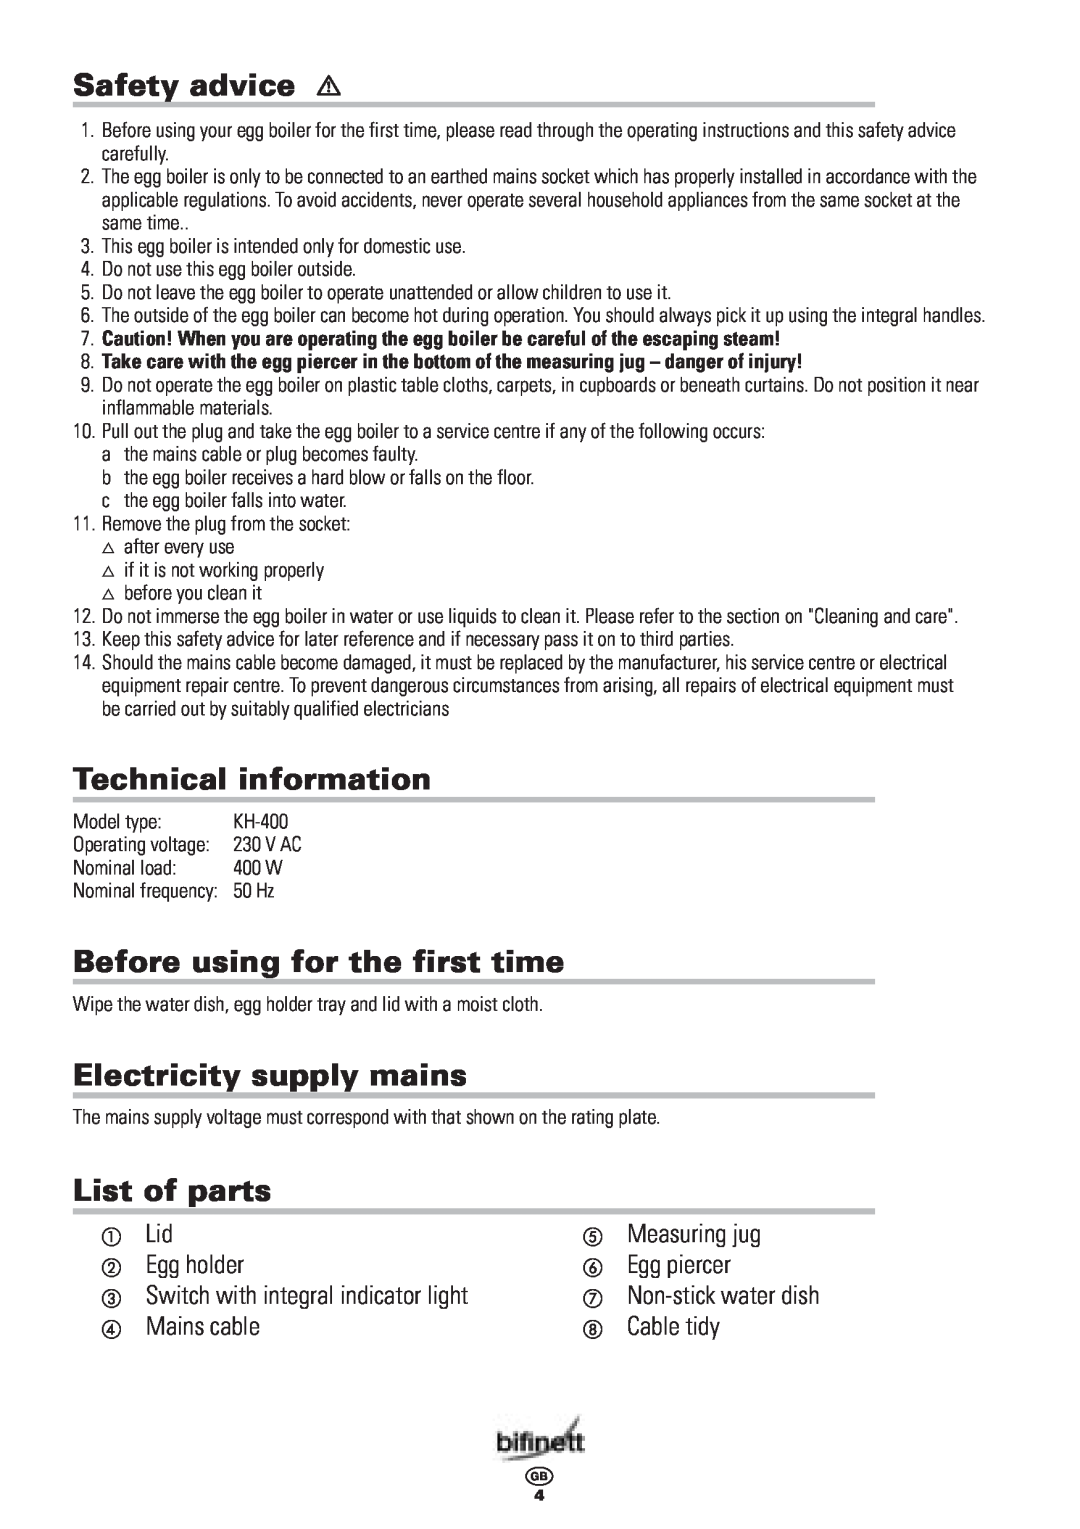 Kompernass KH 400 manual Safety advice, Technical information, Before using for the first time, Electricity supply mains 